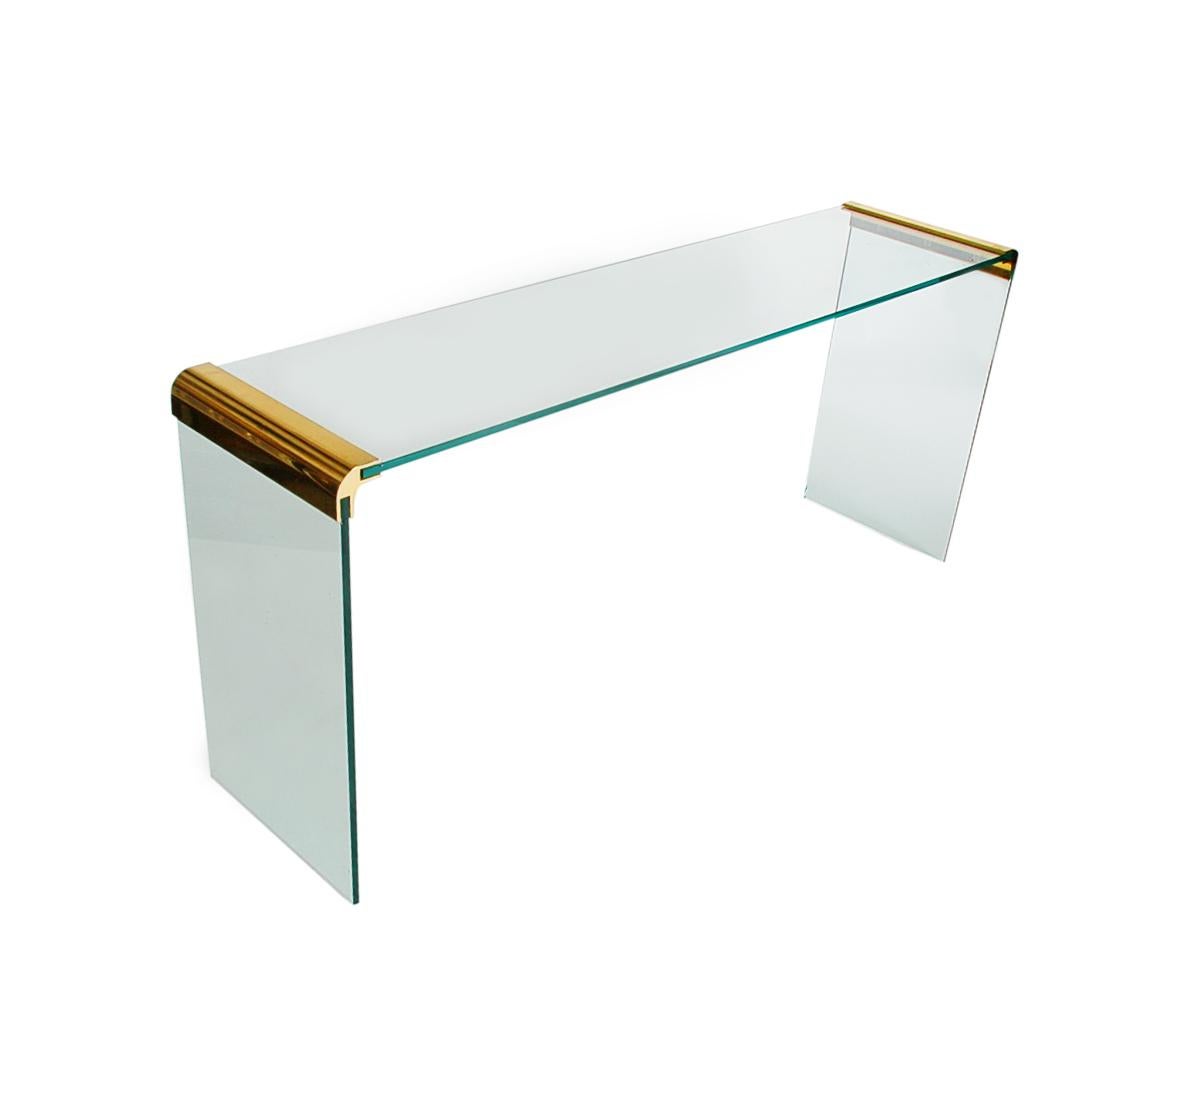 Late 20th Century Mid-Century Modern Brass and Glass Console or Sofa Table by Leon Rosen for Pace